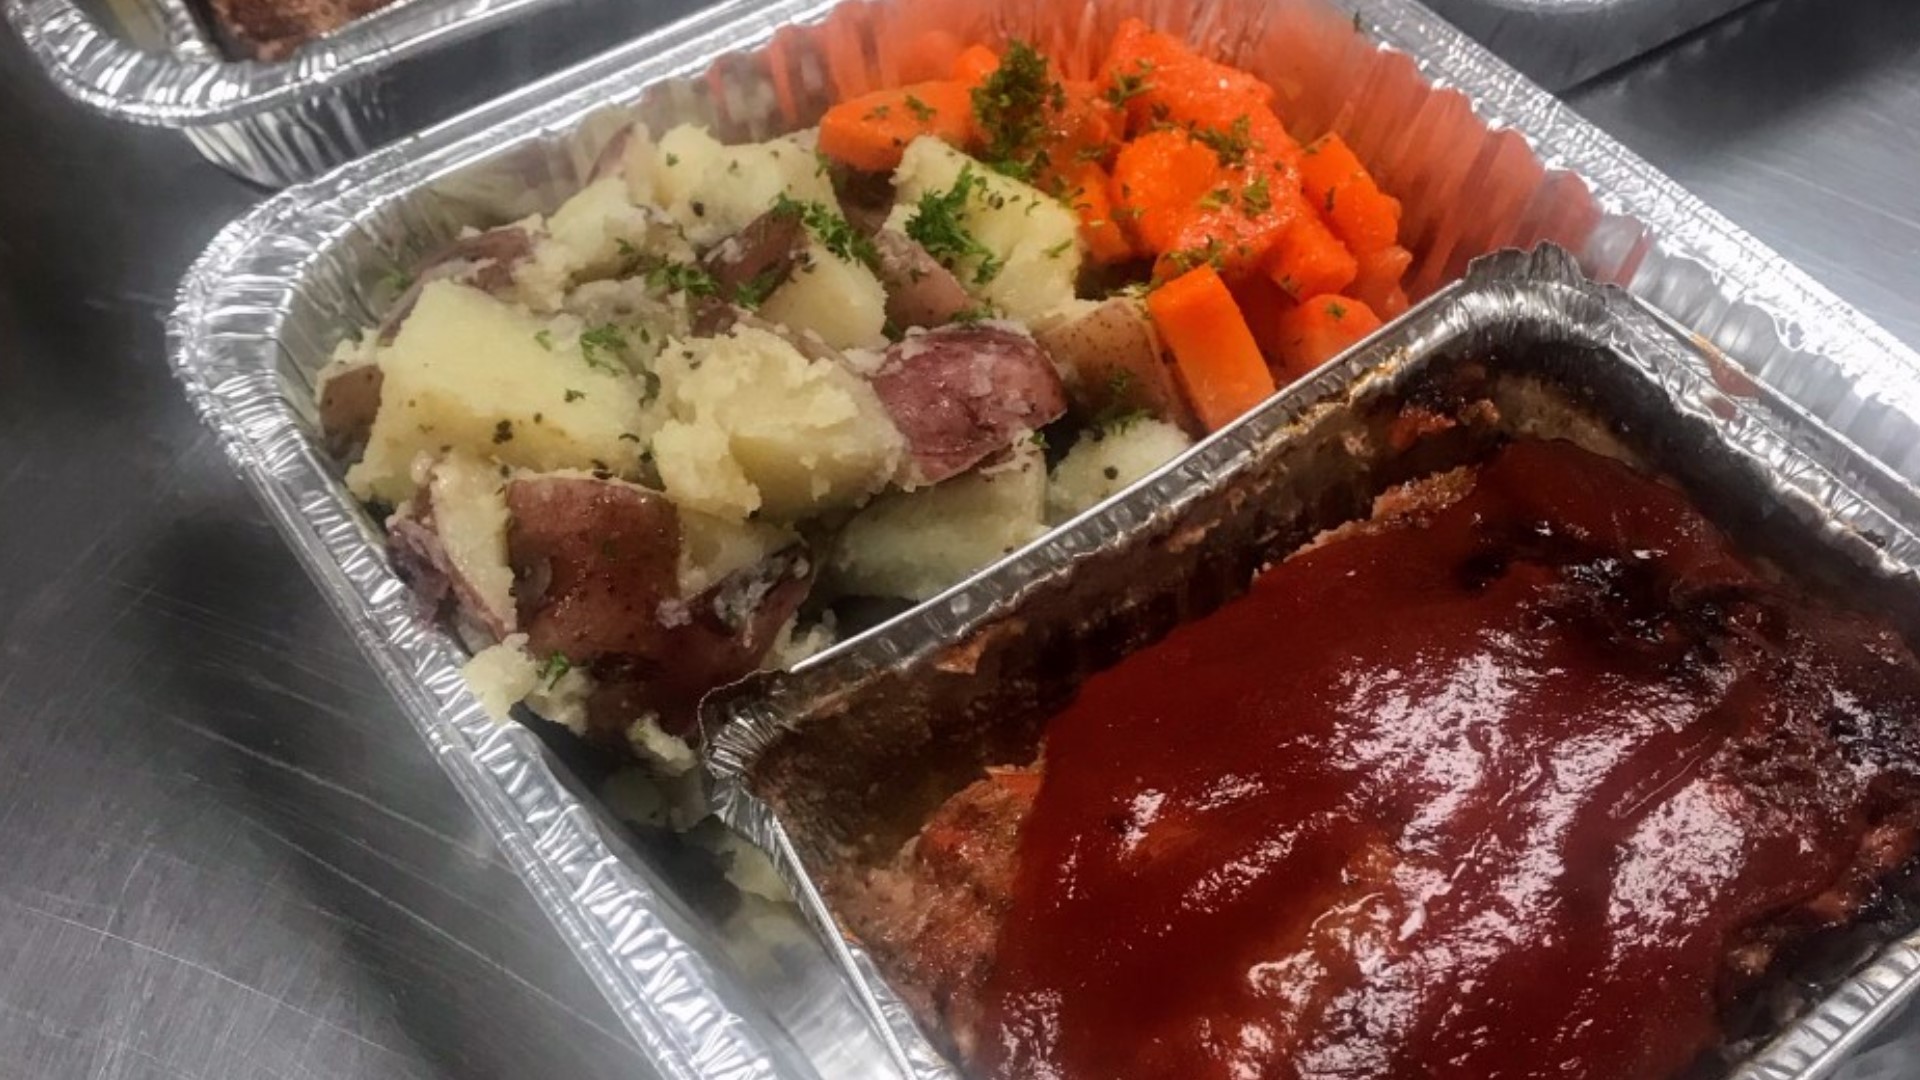 Learn about this local business that makes and delivers "family style" meals to busy families.